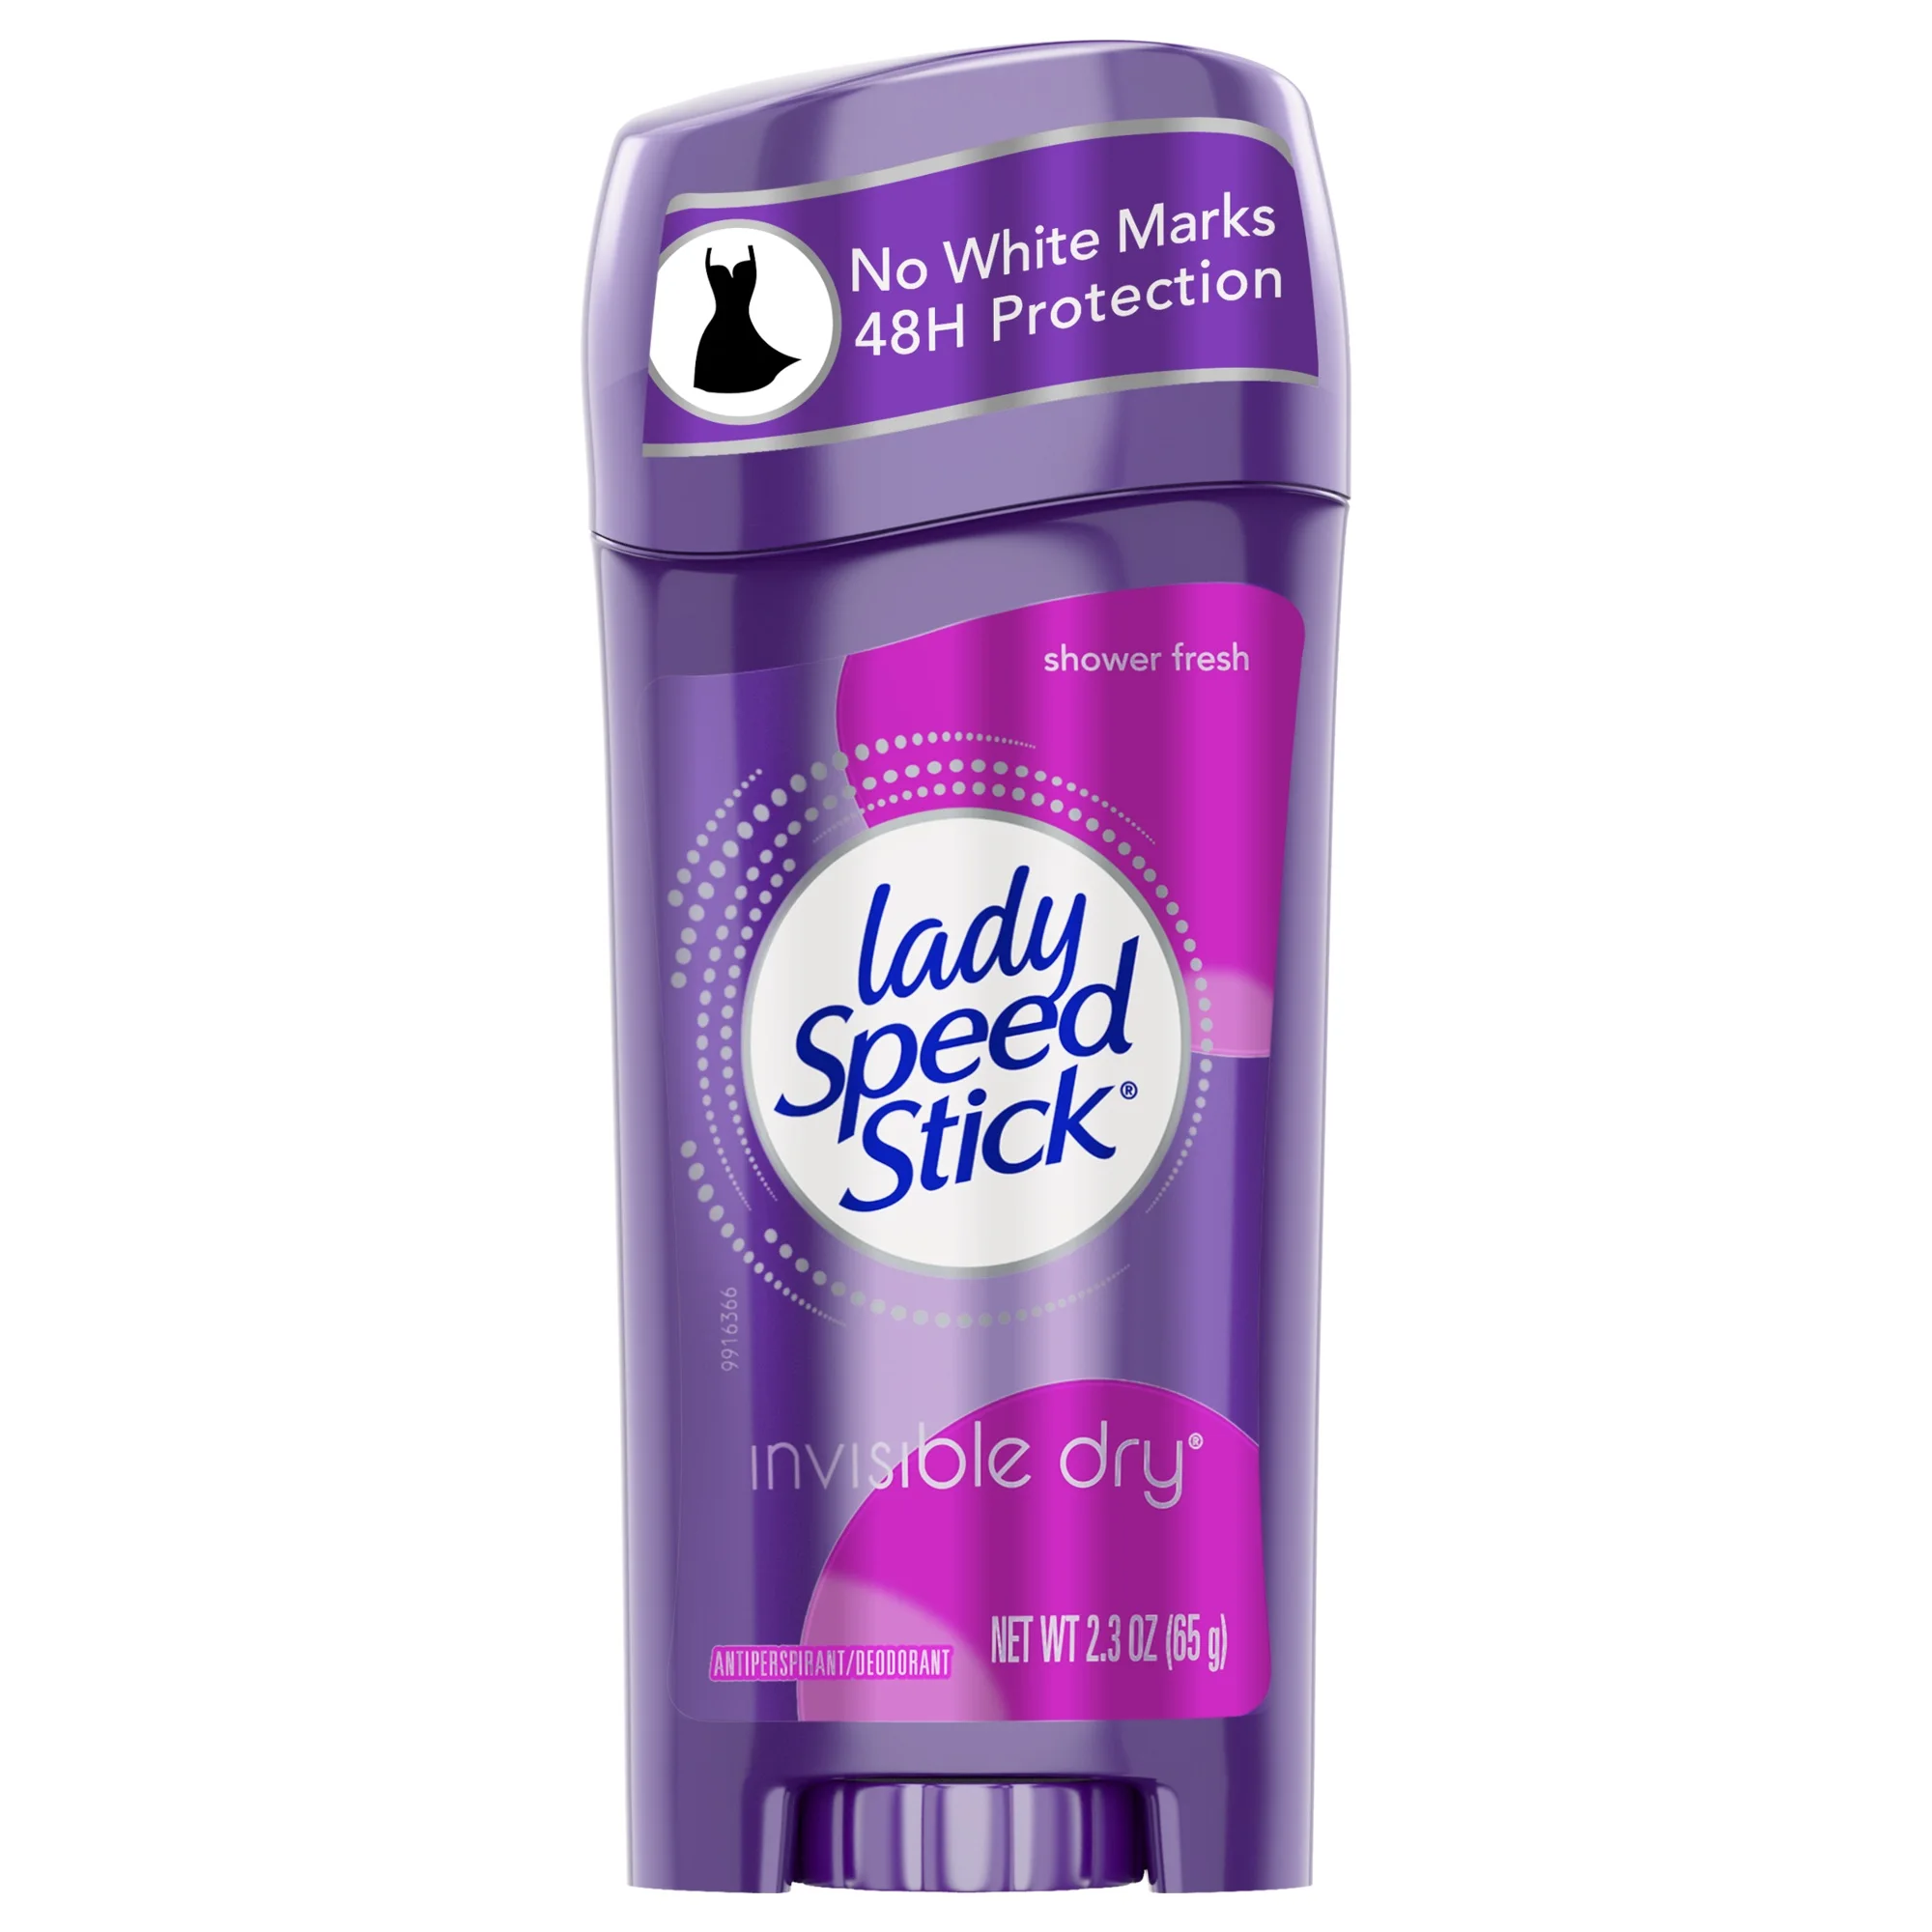 Lady Speed Stick Invisible Dry Deodorant, Shower Fresh 2.3 Oz(65g)